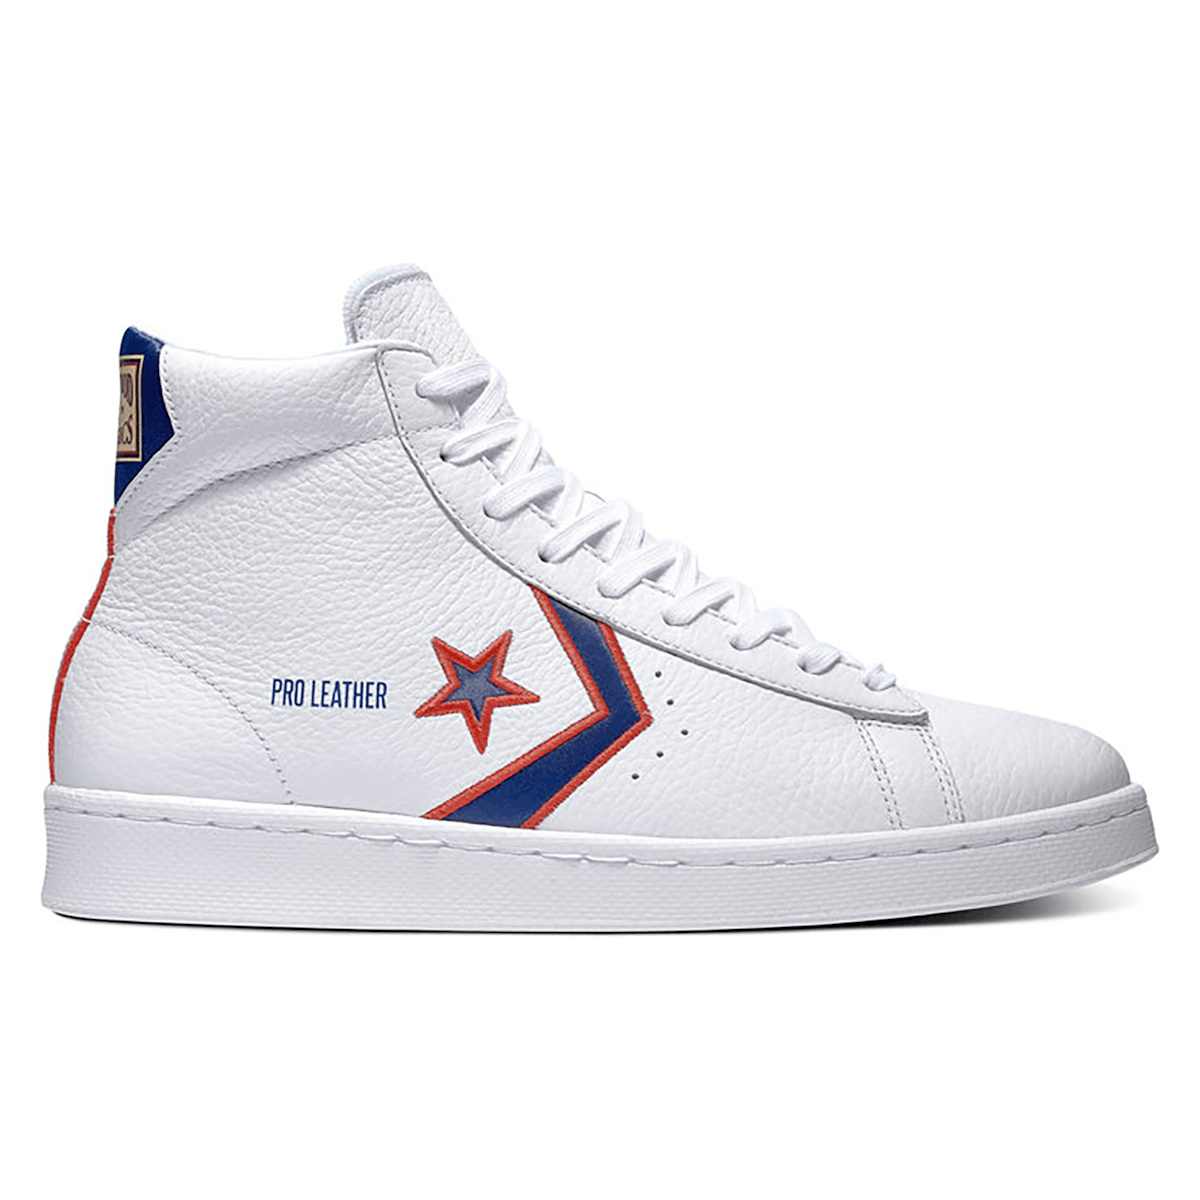 Converse Pro Leather Breaking Down Barriers Pistons